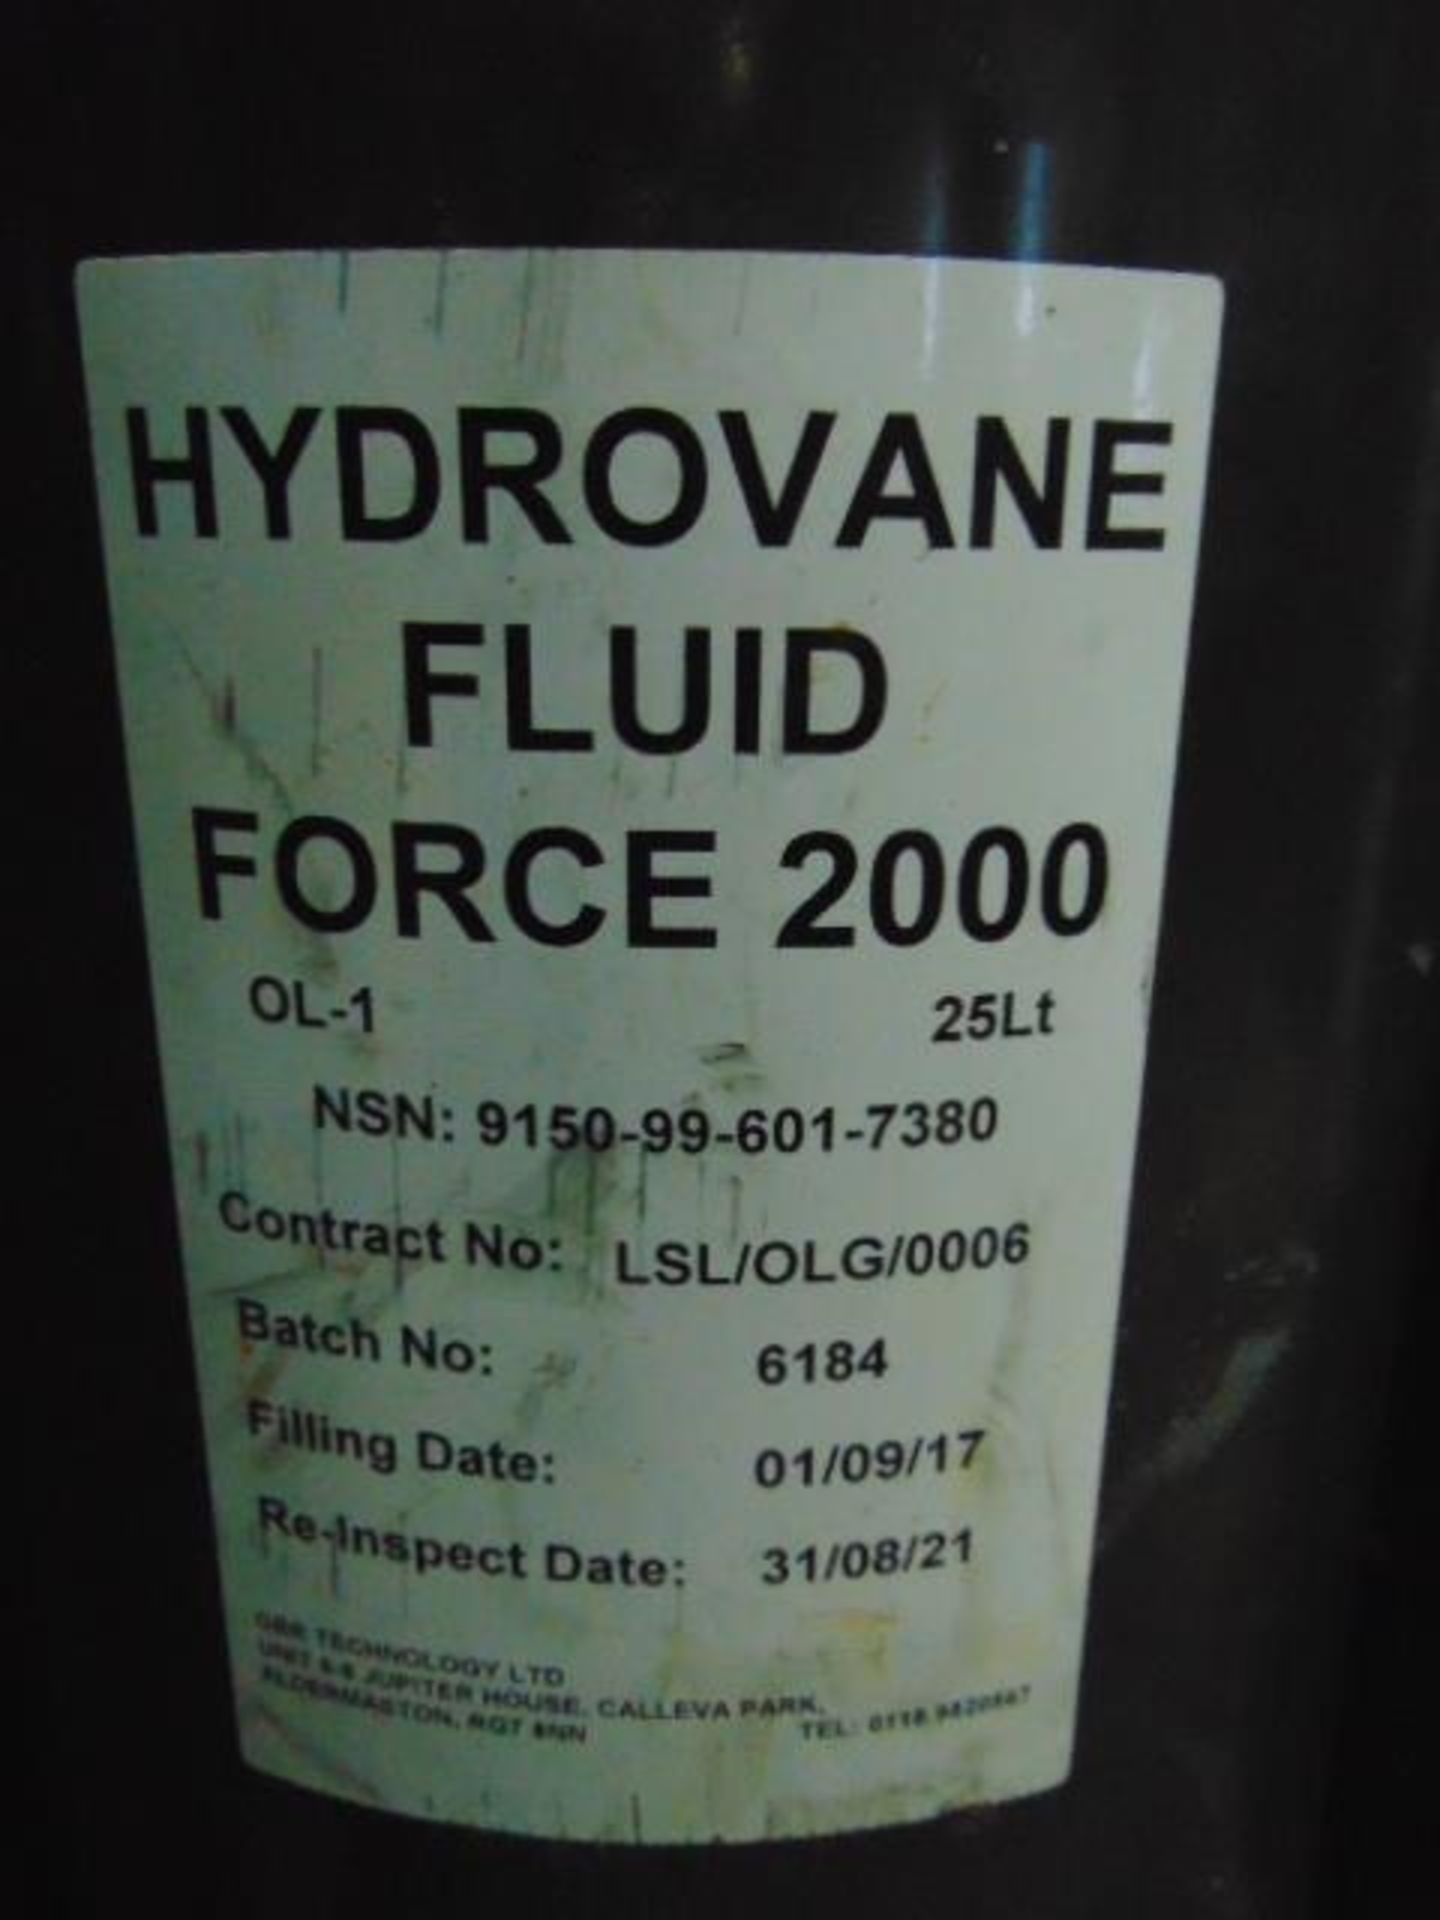 10 x 25 Ltr Hydrovane Fluid Force 2000 Unissued Direct from Reserve Stores - Image 2 of 2